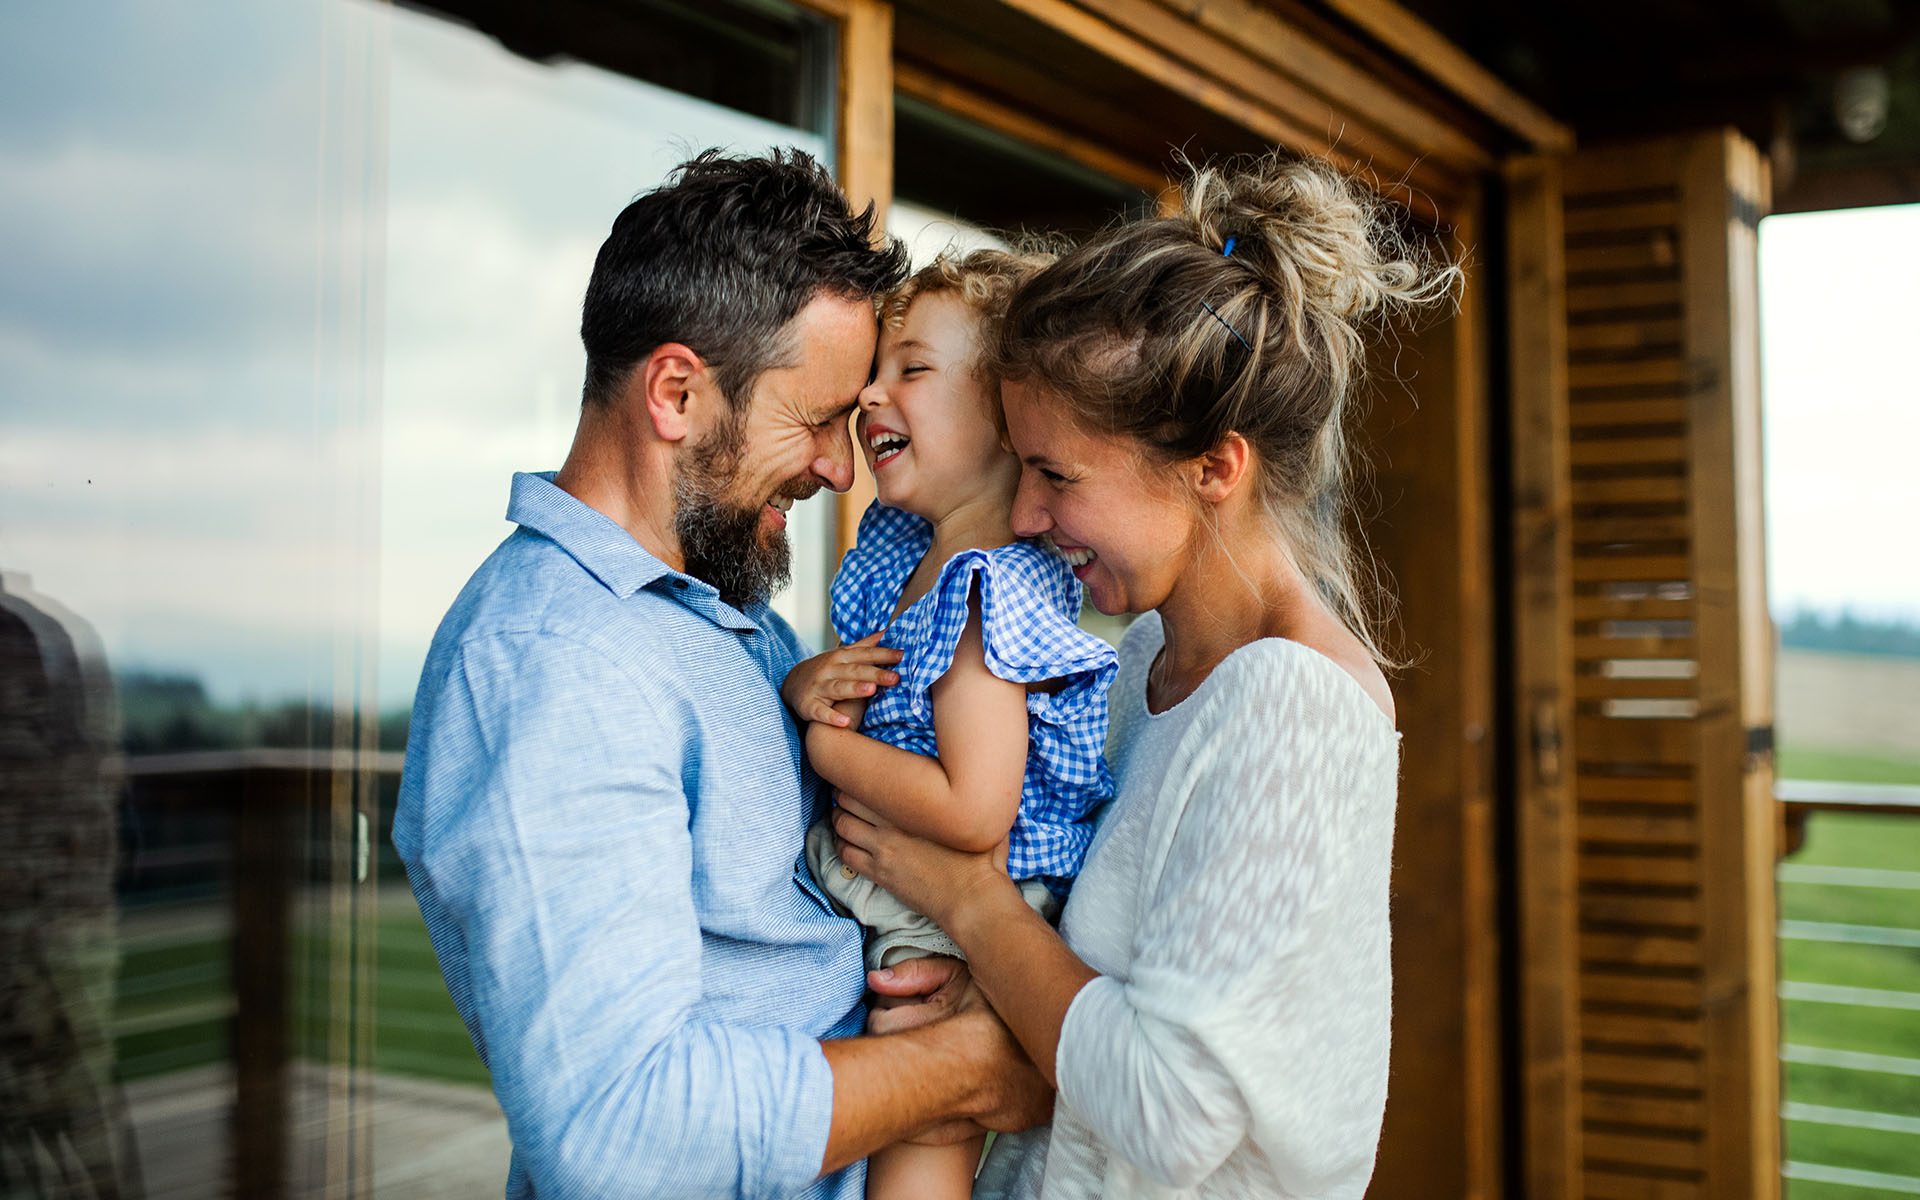 Homepage - Cheerful Family Having Fun Standing Outside on the Front Porch of a Vacation Home in the Countryside